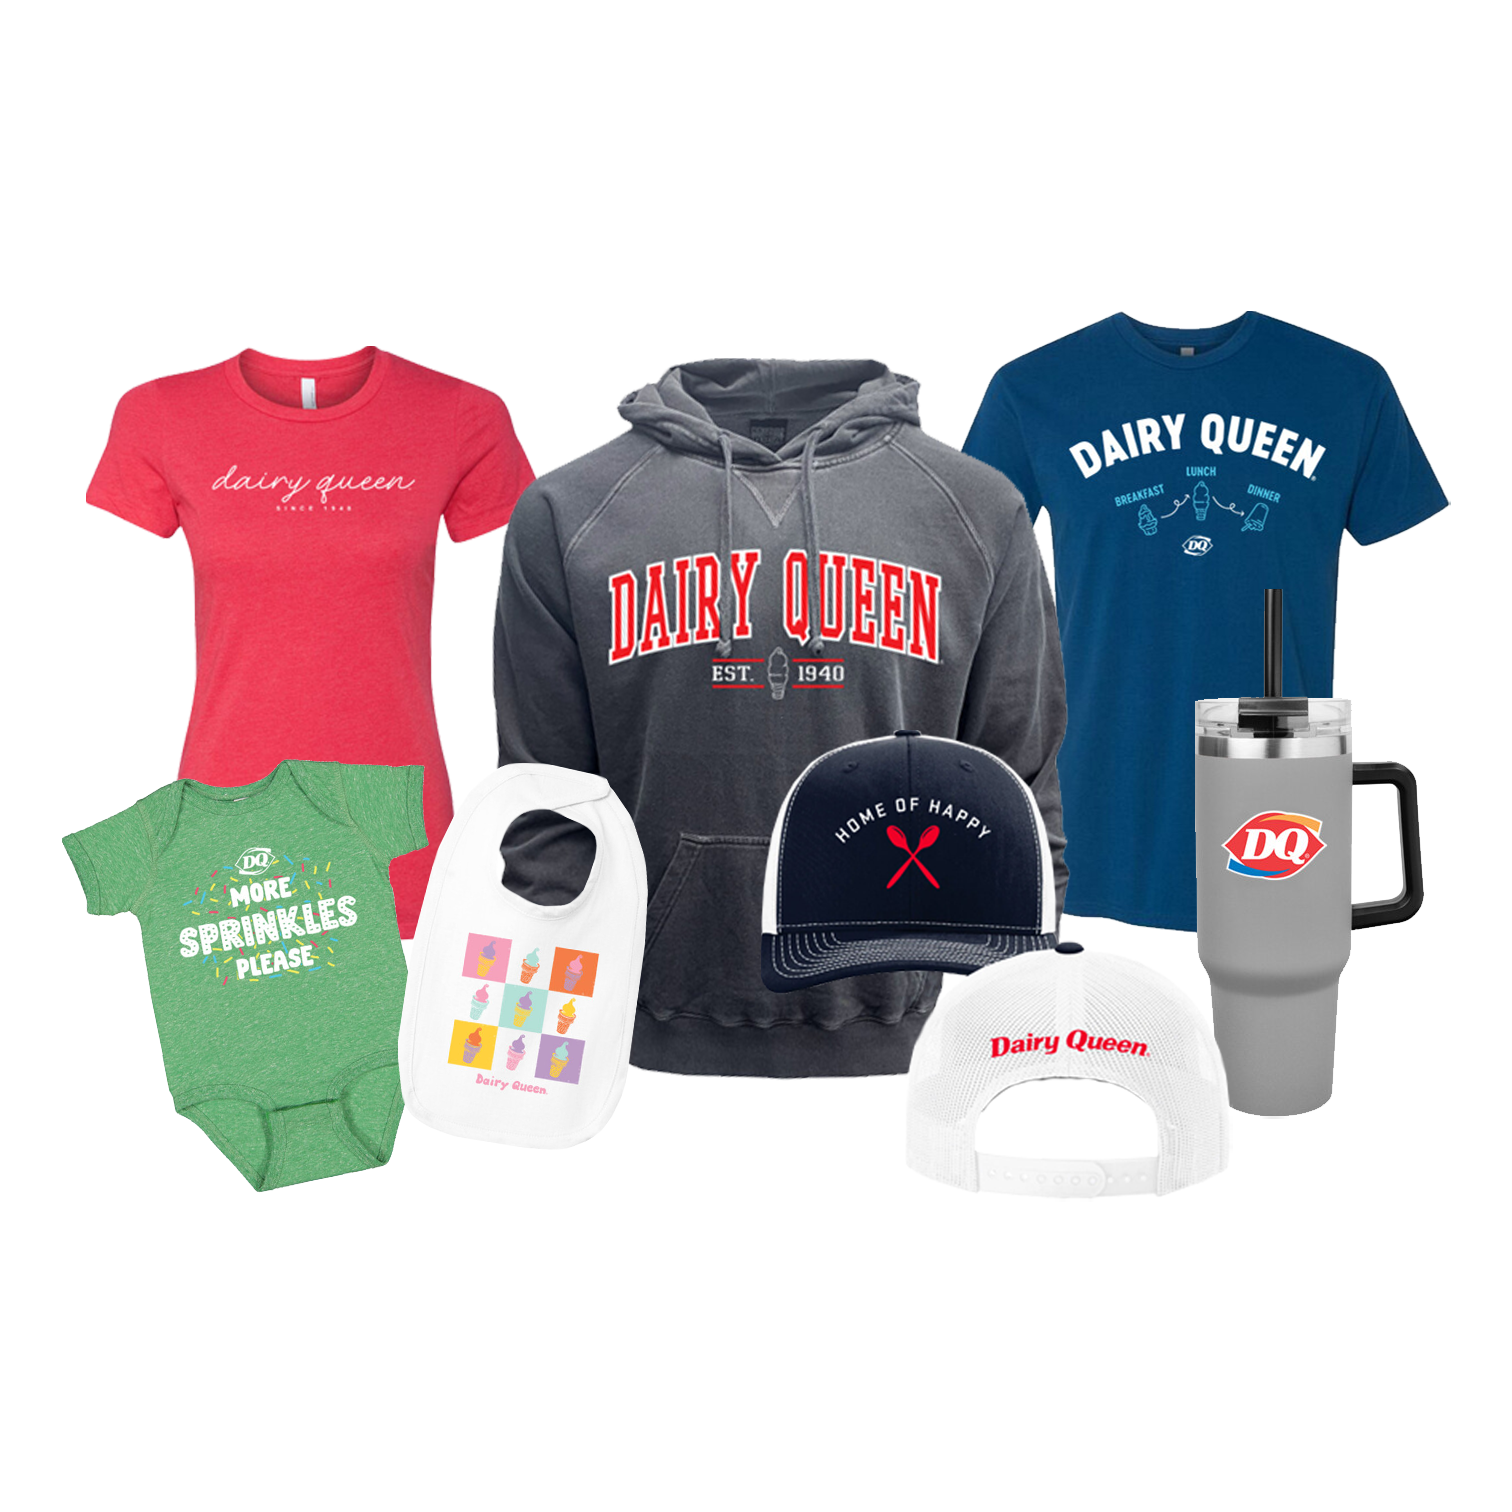 DQ T-shirts, hat, and shoe gear